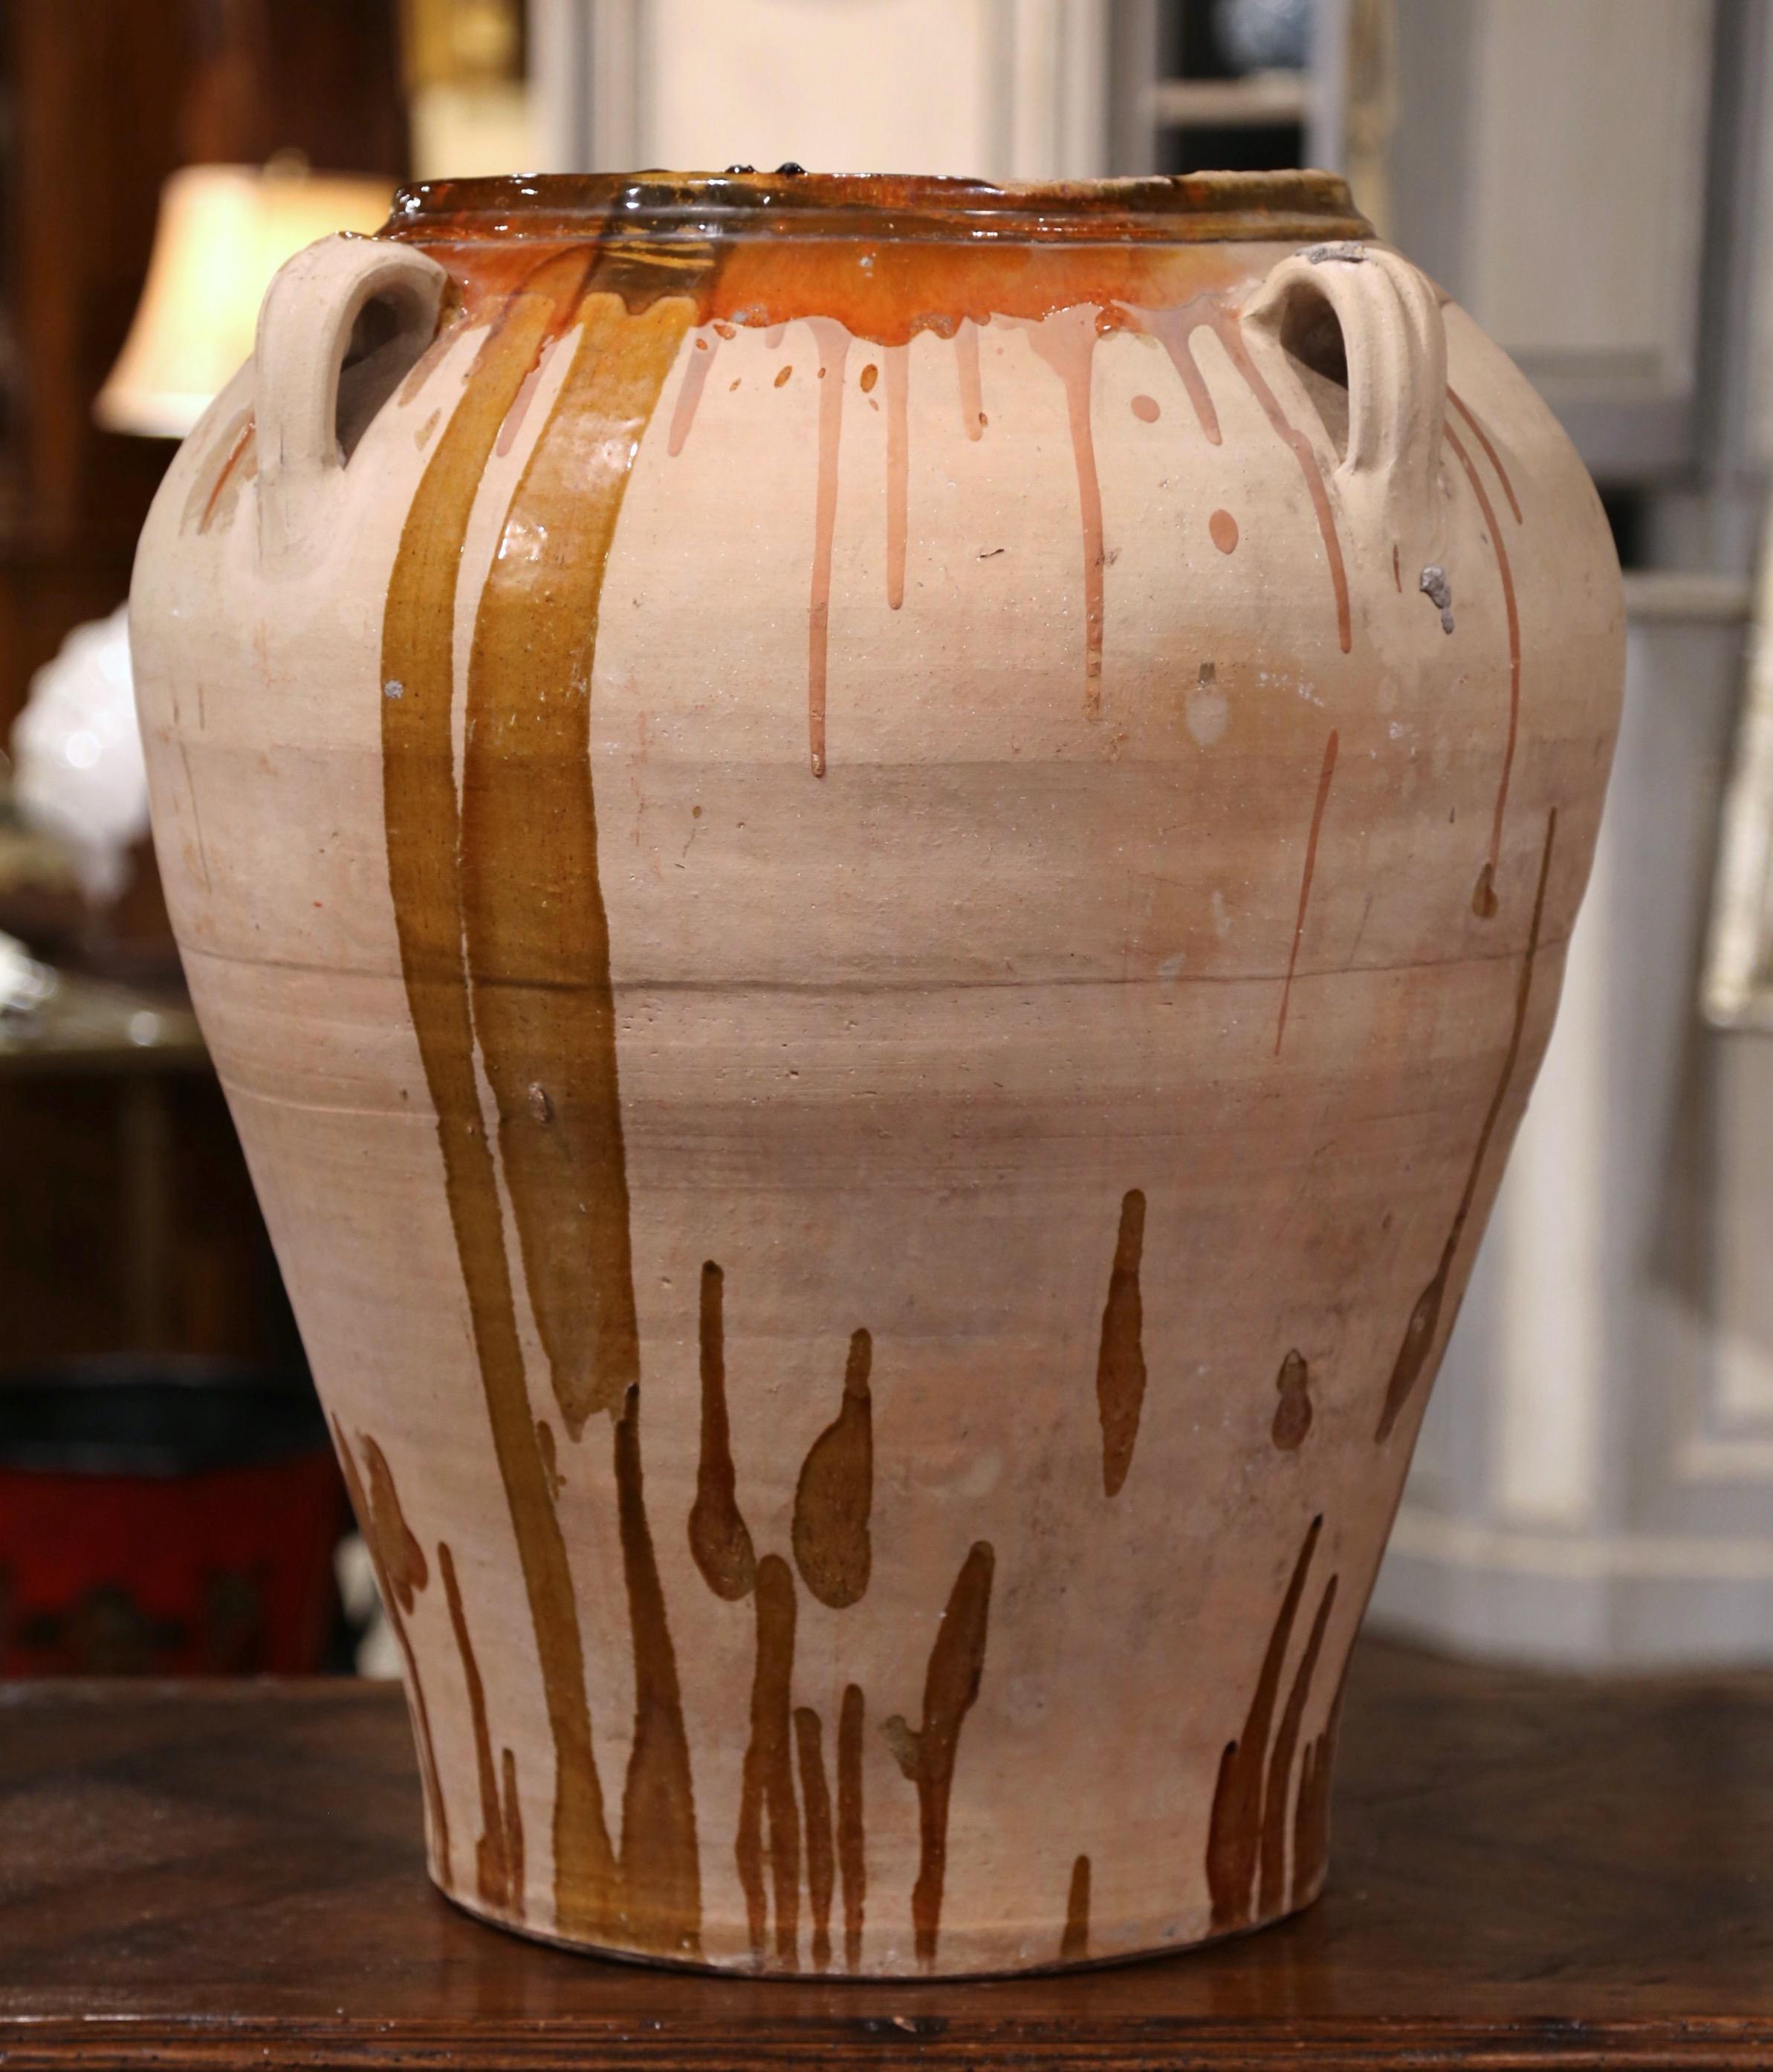 This large, antique earthenware jar was created in Southern France, circa 1870, made of blond clay and round in shape with a tapered base, the terracotta pot features four handles at the top. The jar is decorated with a brown beige glaze around the